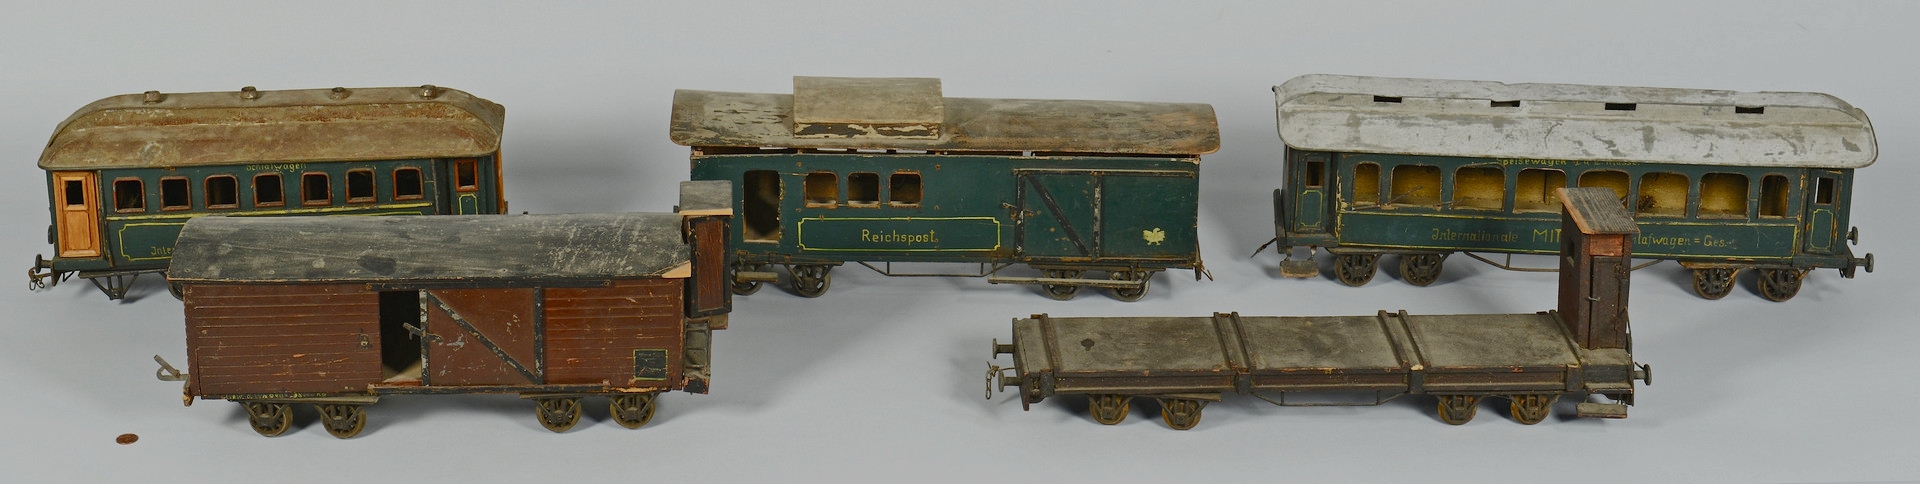 Lot 473: 5 Large Floor Scale Wooden Train Cars, Mitropa